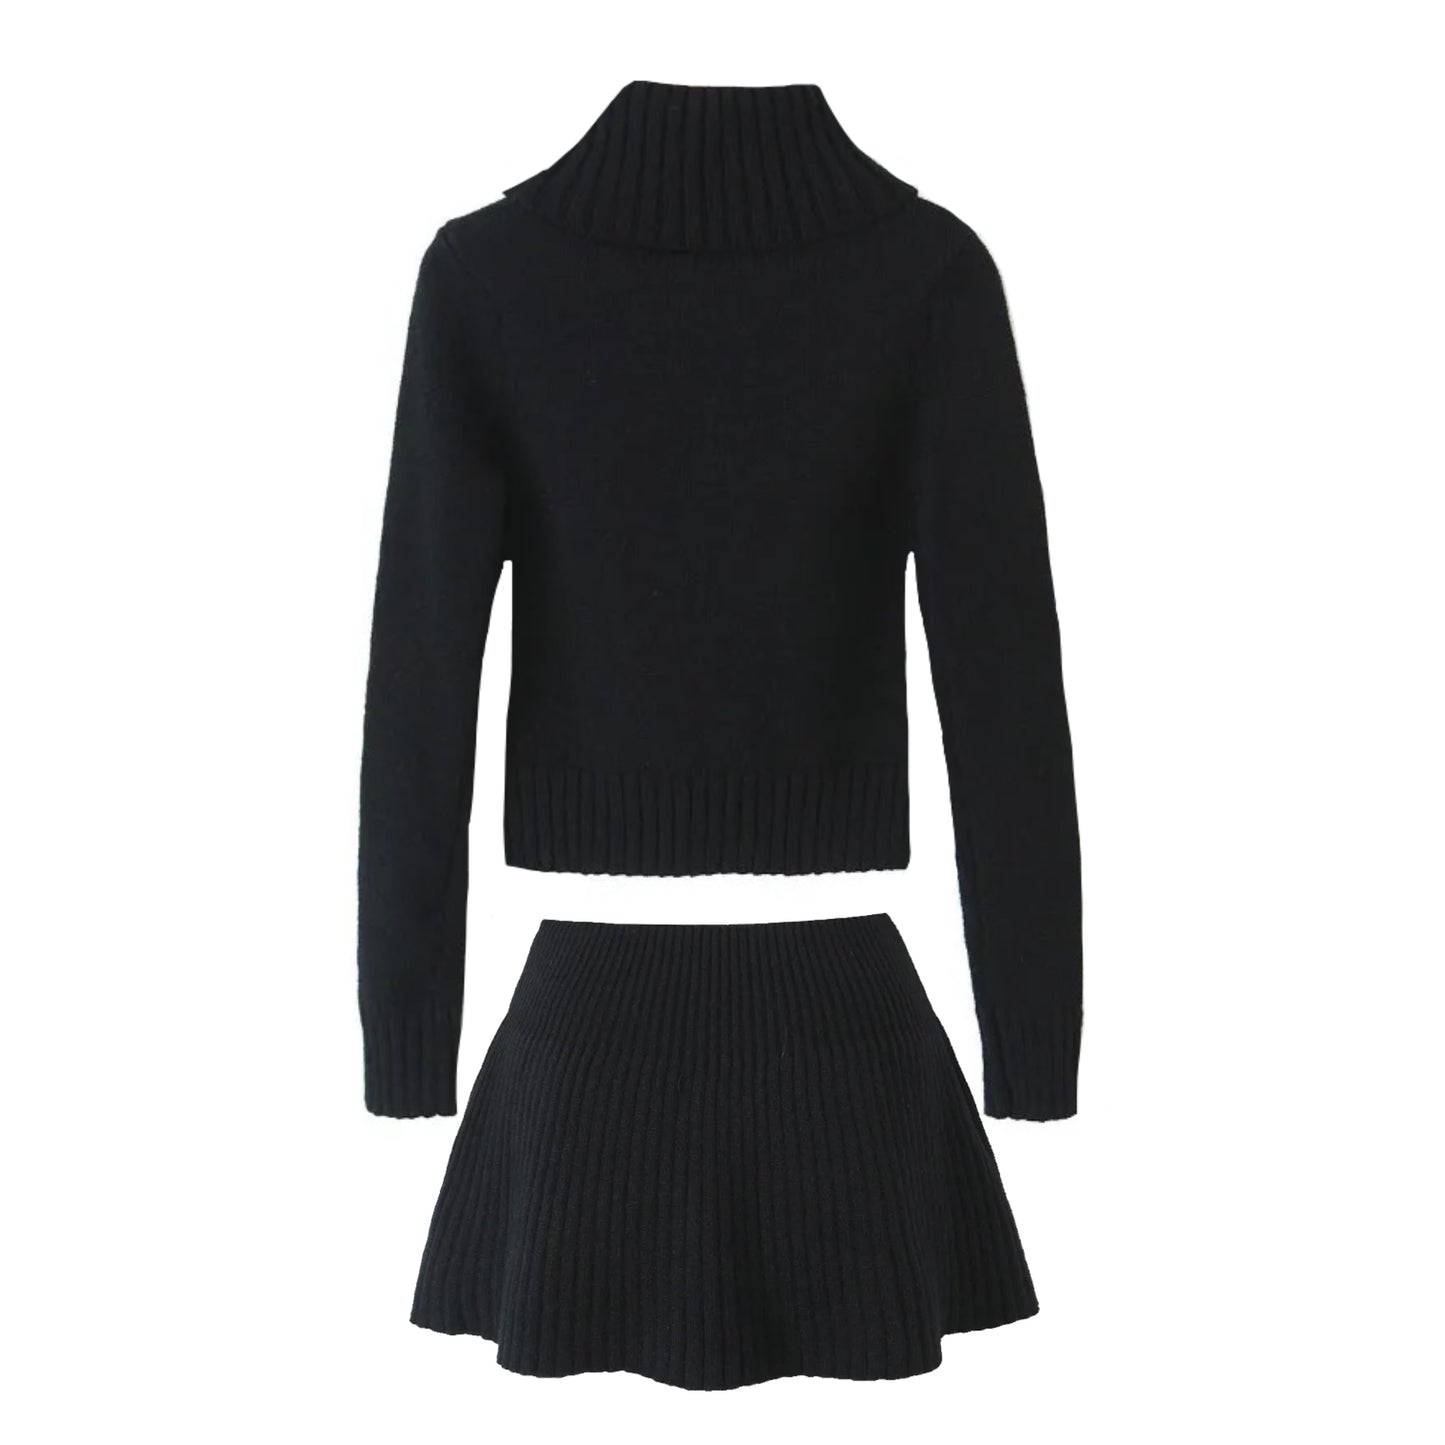 Black Knit Fitted Sweater & Skirt Set